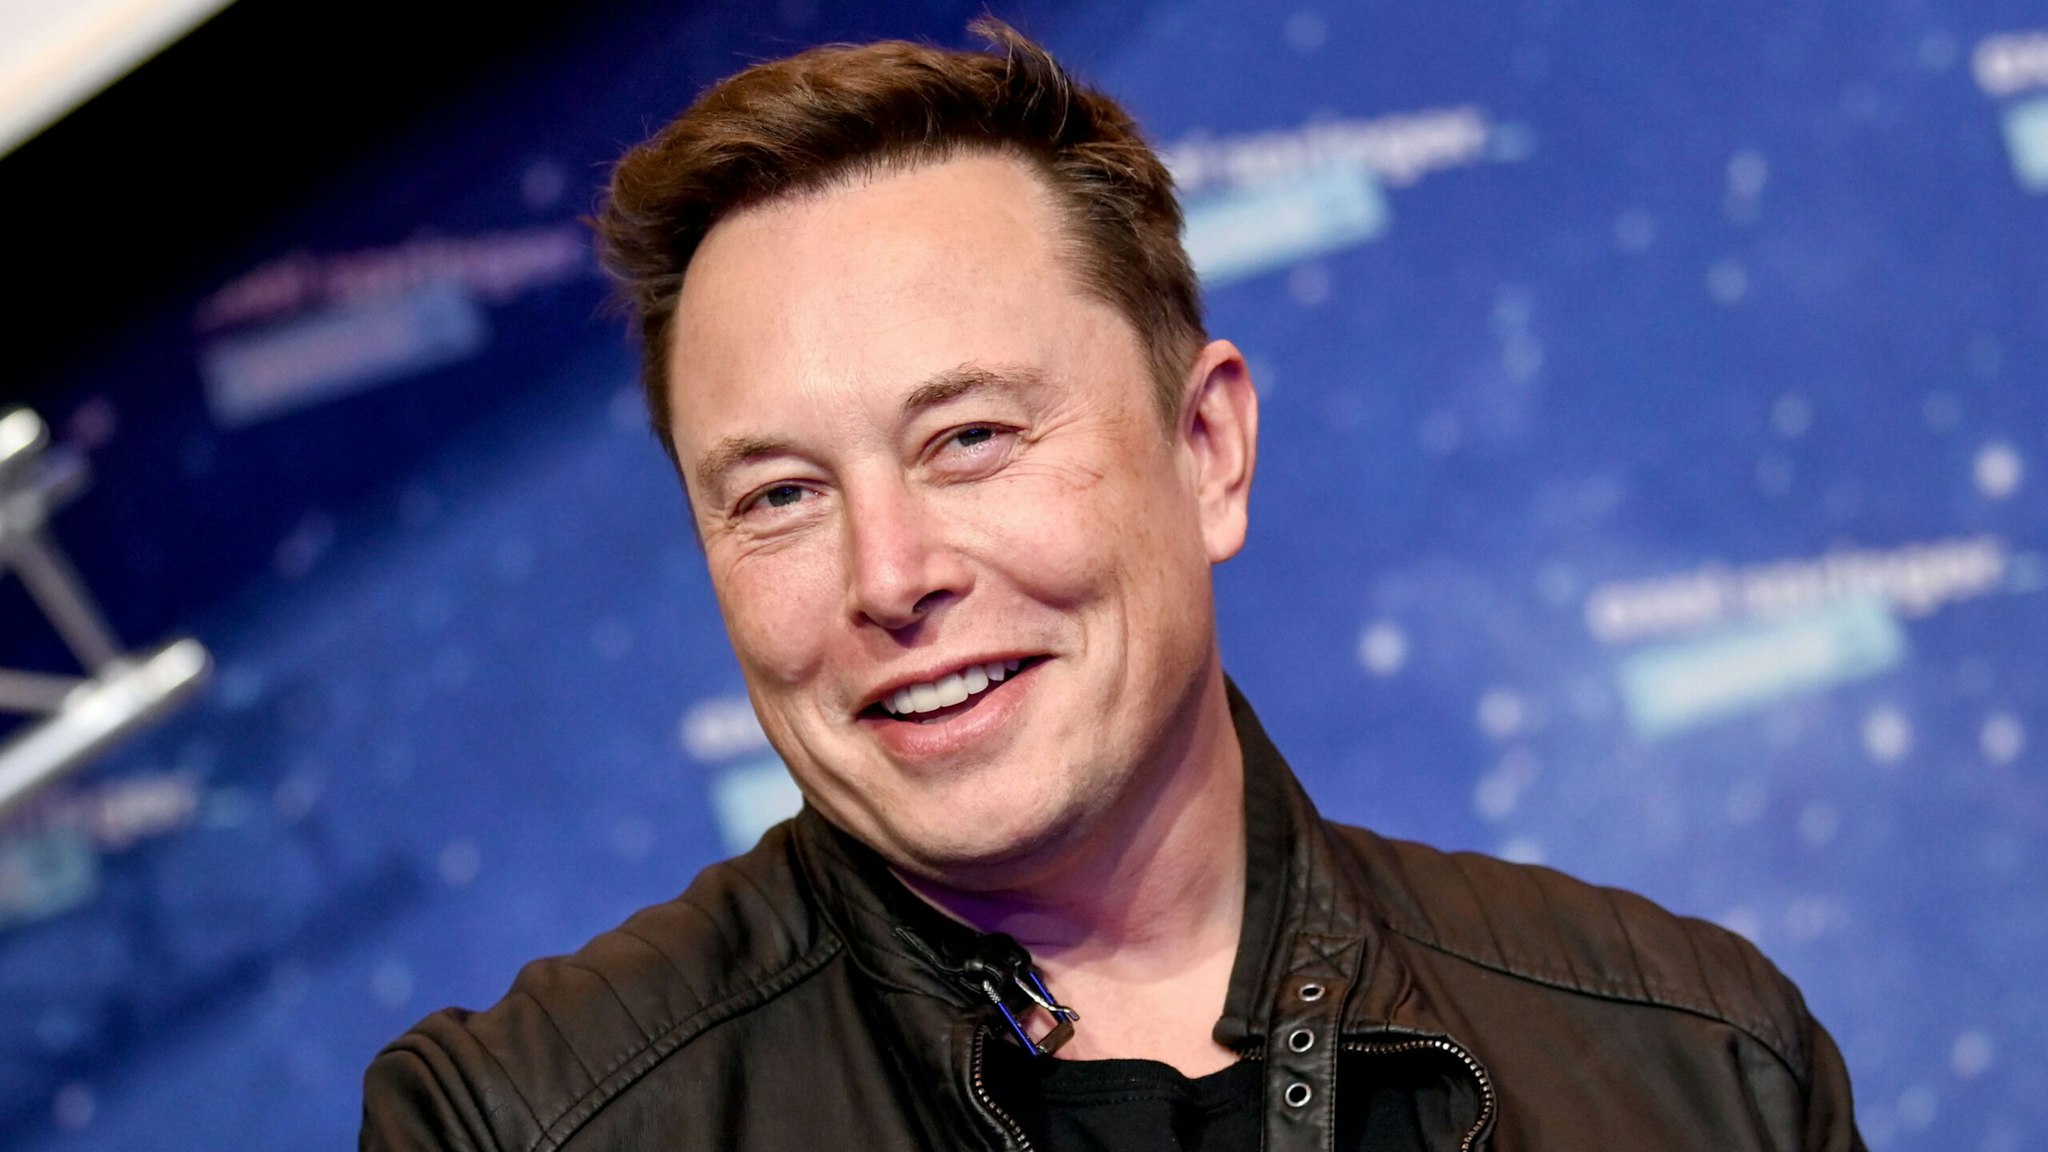 SpaceX owner and Tesla CEO Elon Musk poses as he arrives on the red carpet for the Axel Springer Awards ceremony, in Berlin, on December 1, 2020.